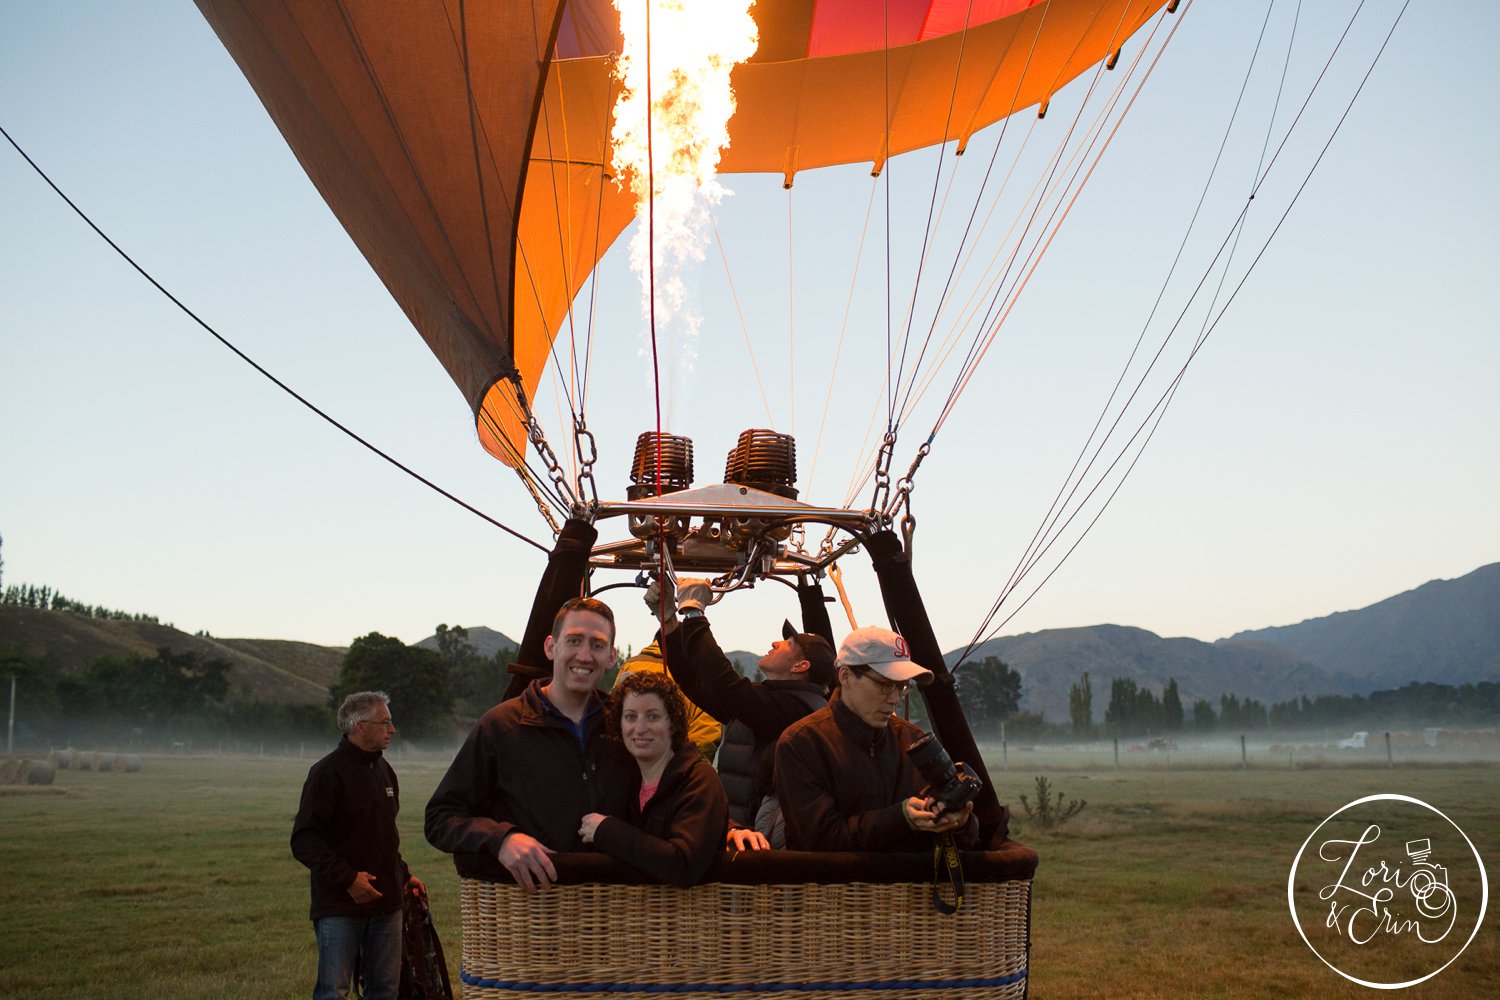  This was our anniversary gift: A hot air balloon ride over Queenstown, NZ! 